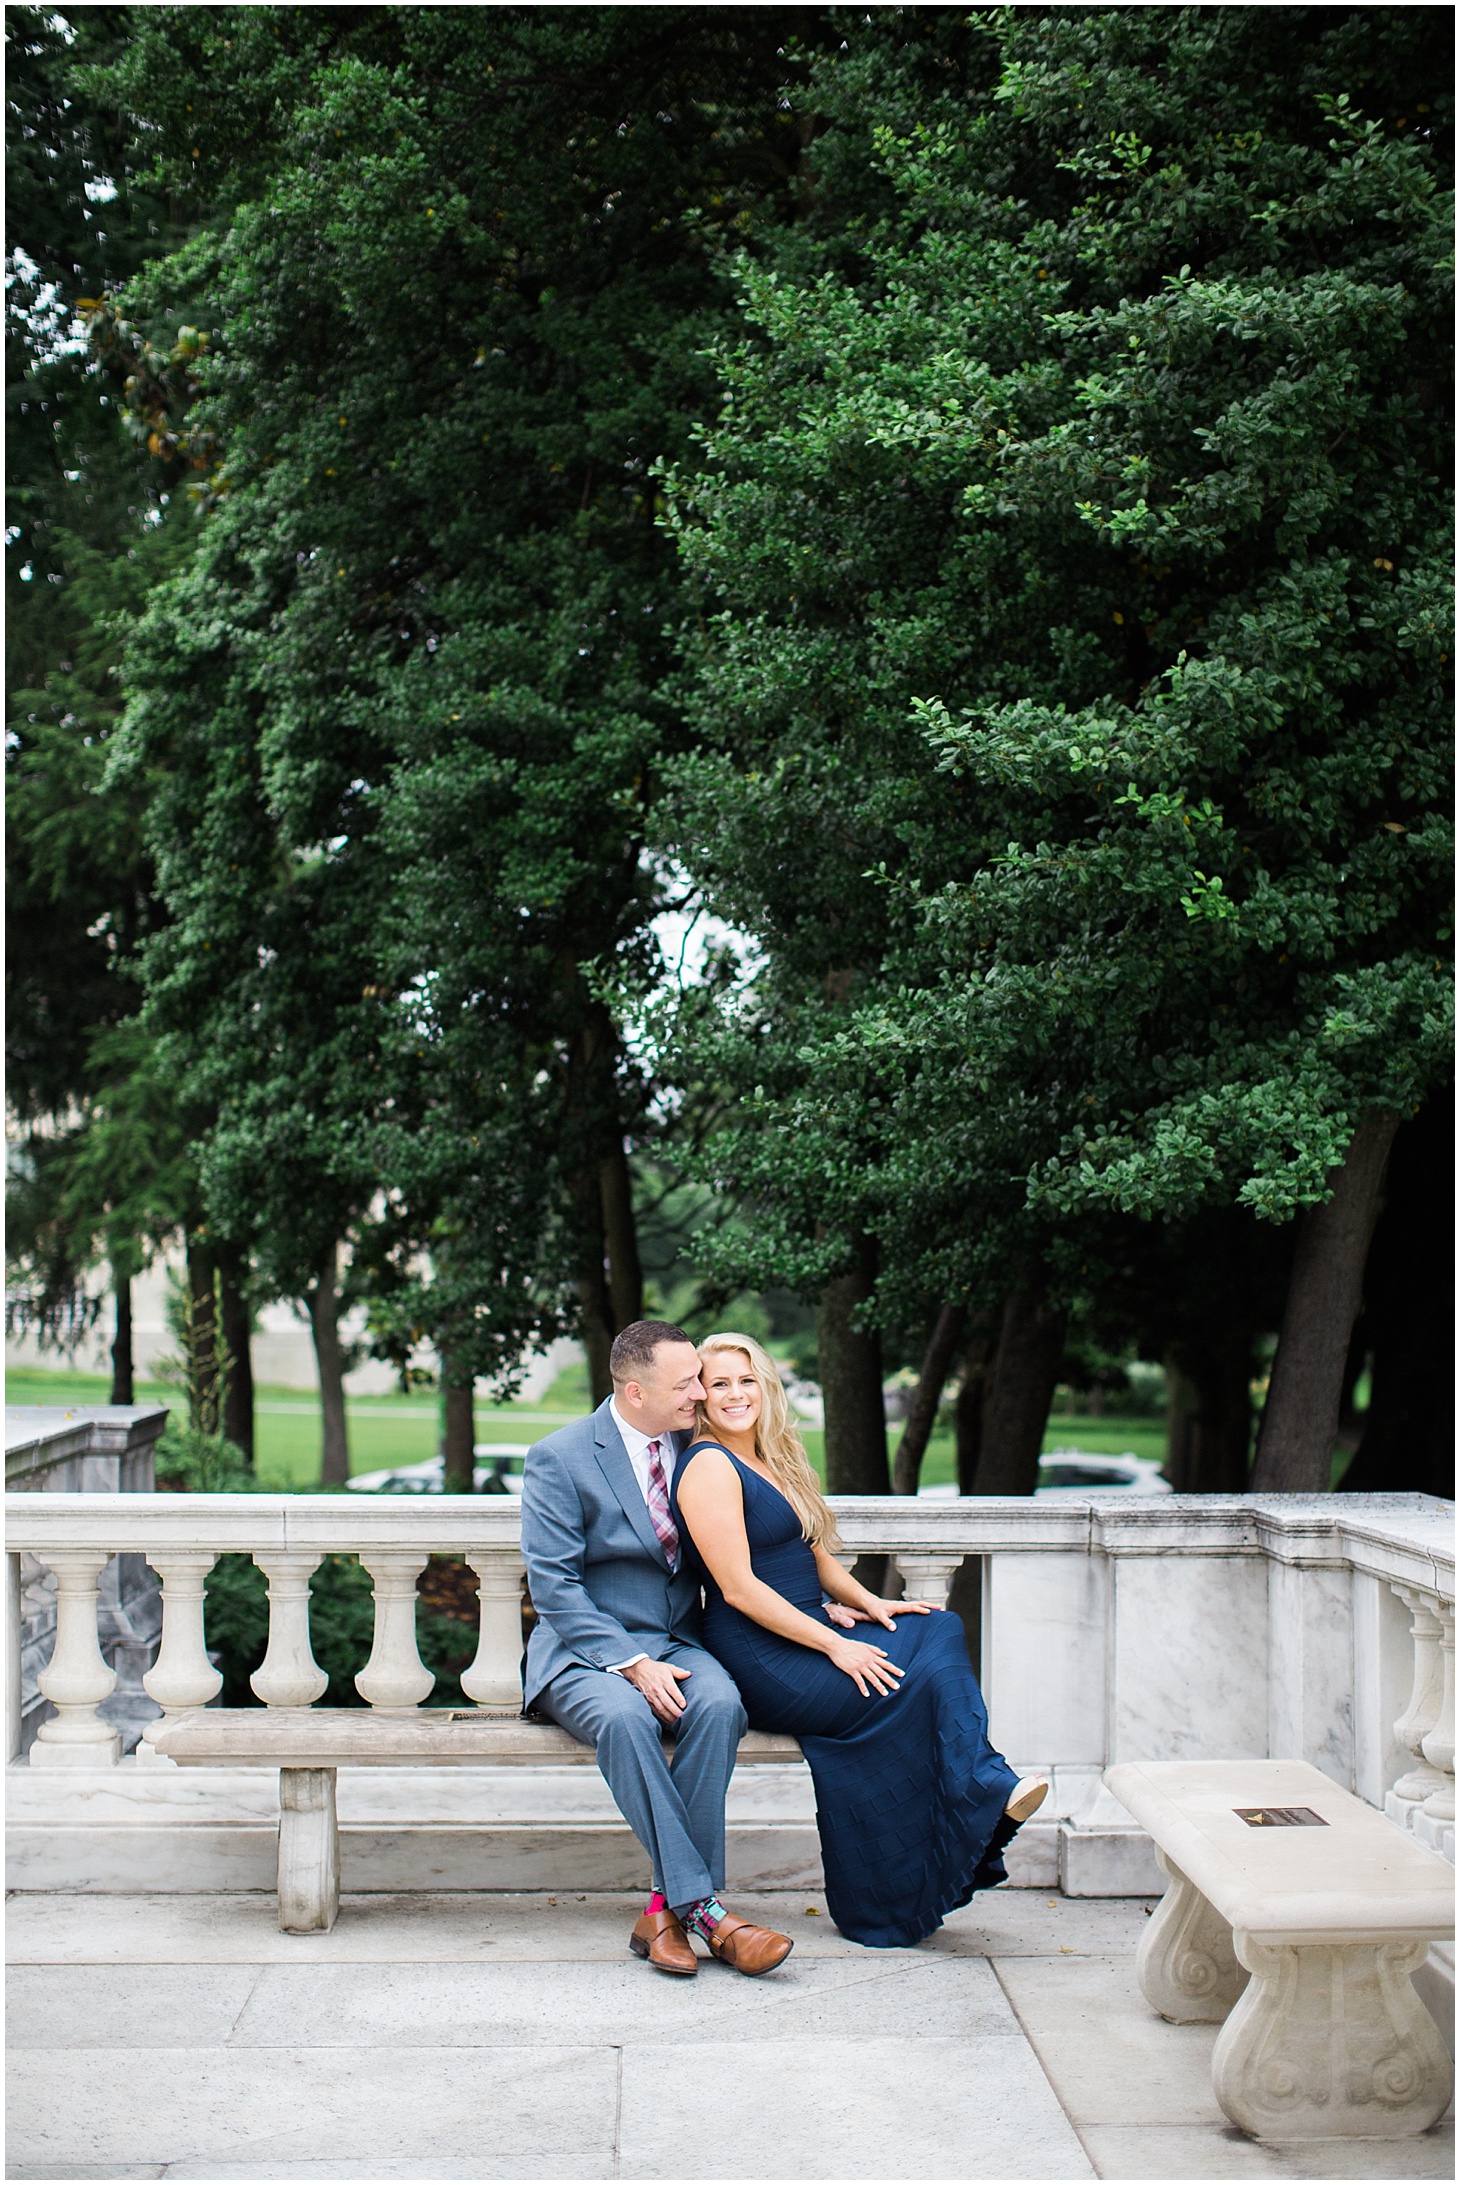 romantic-engagement-shoot-around-the-beautiful-d-c-monuments-by-sarah-bradshaw-photography_0010